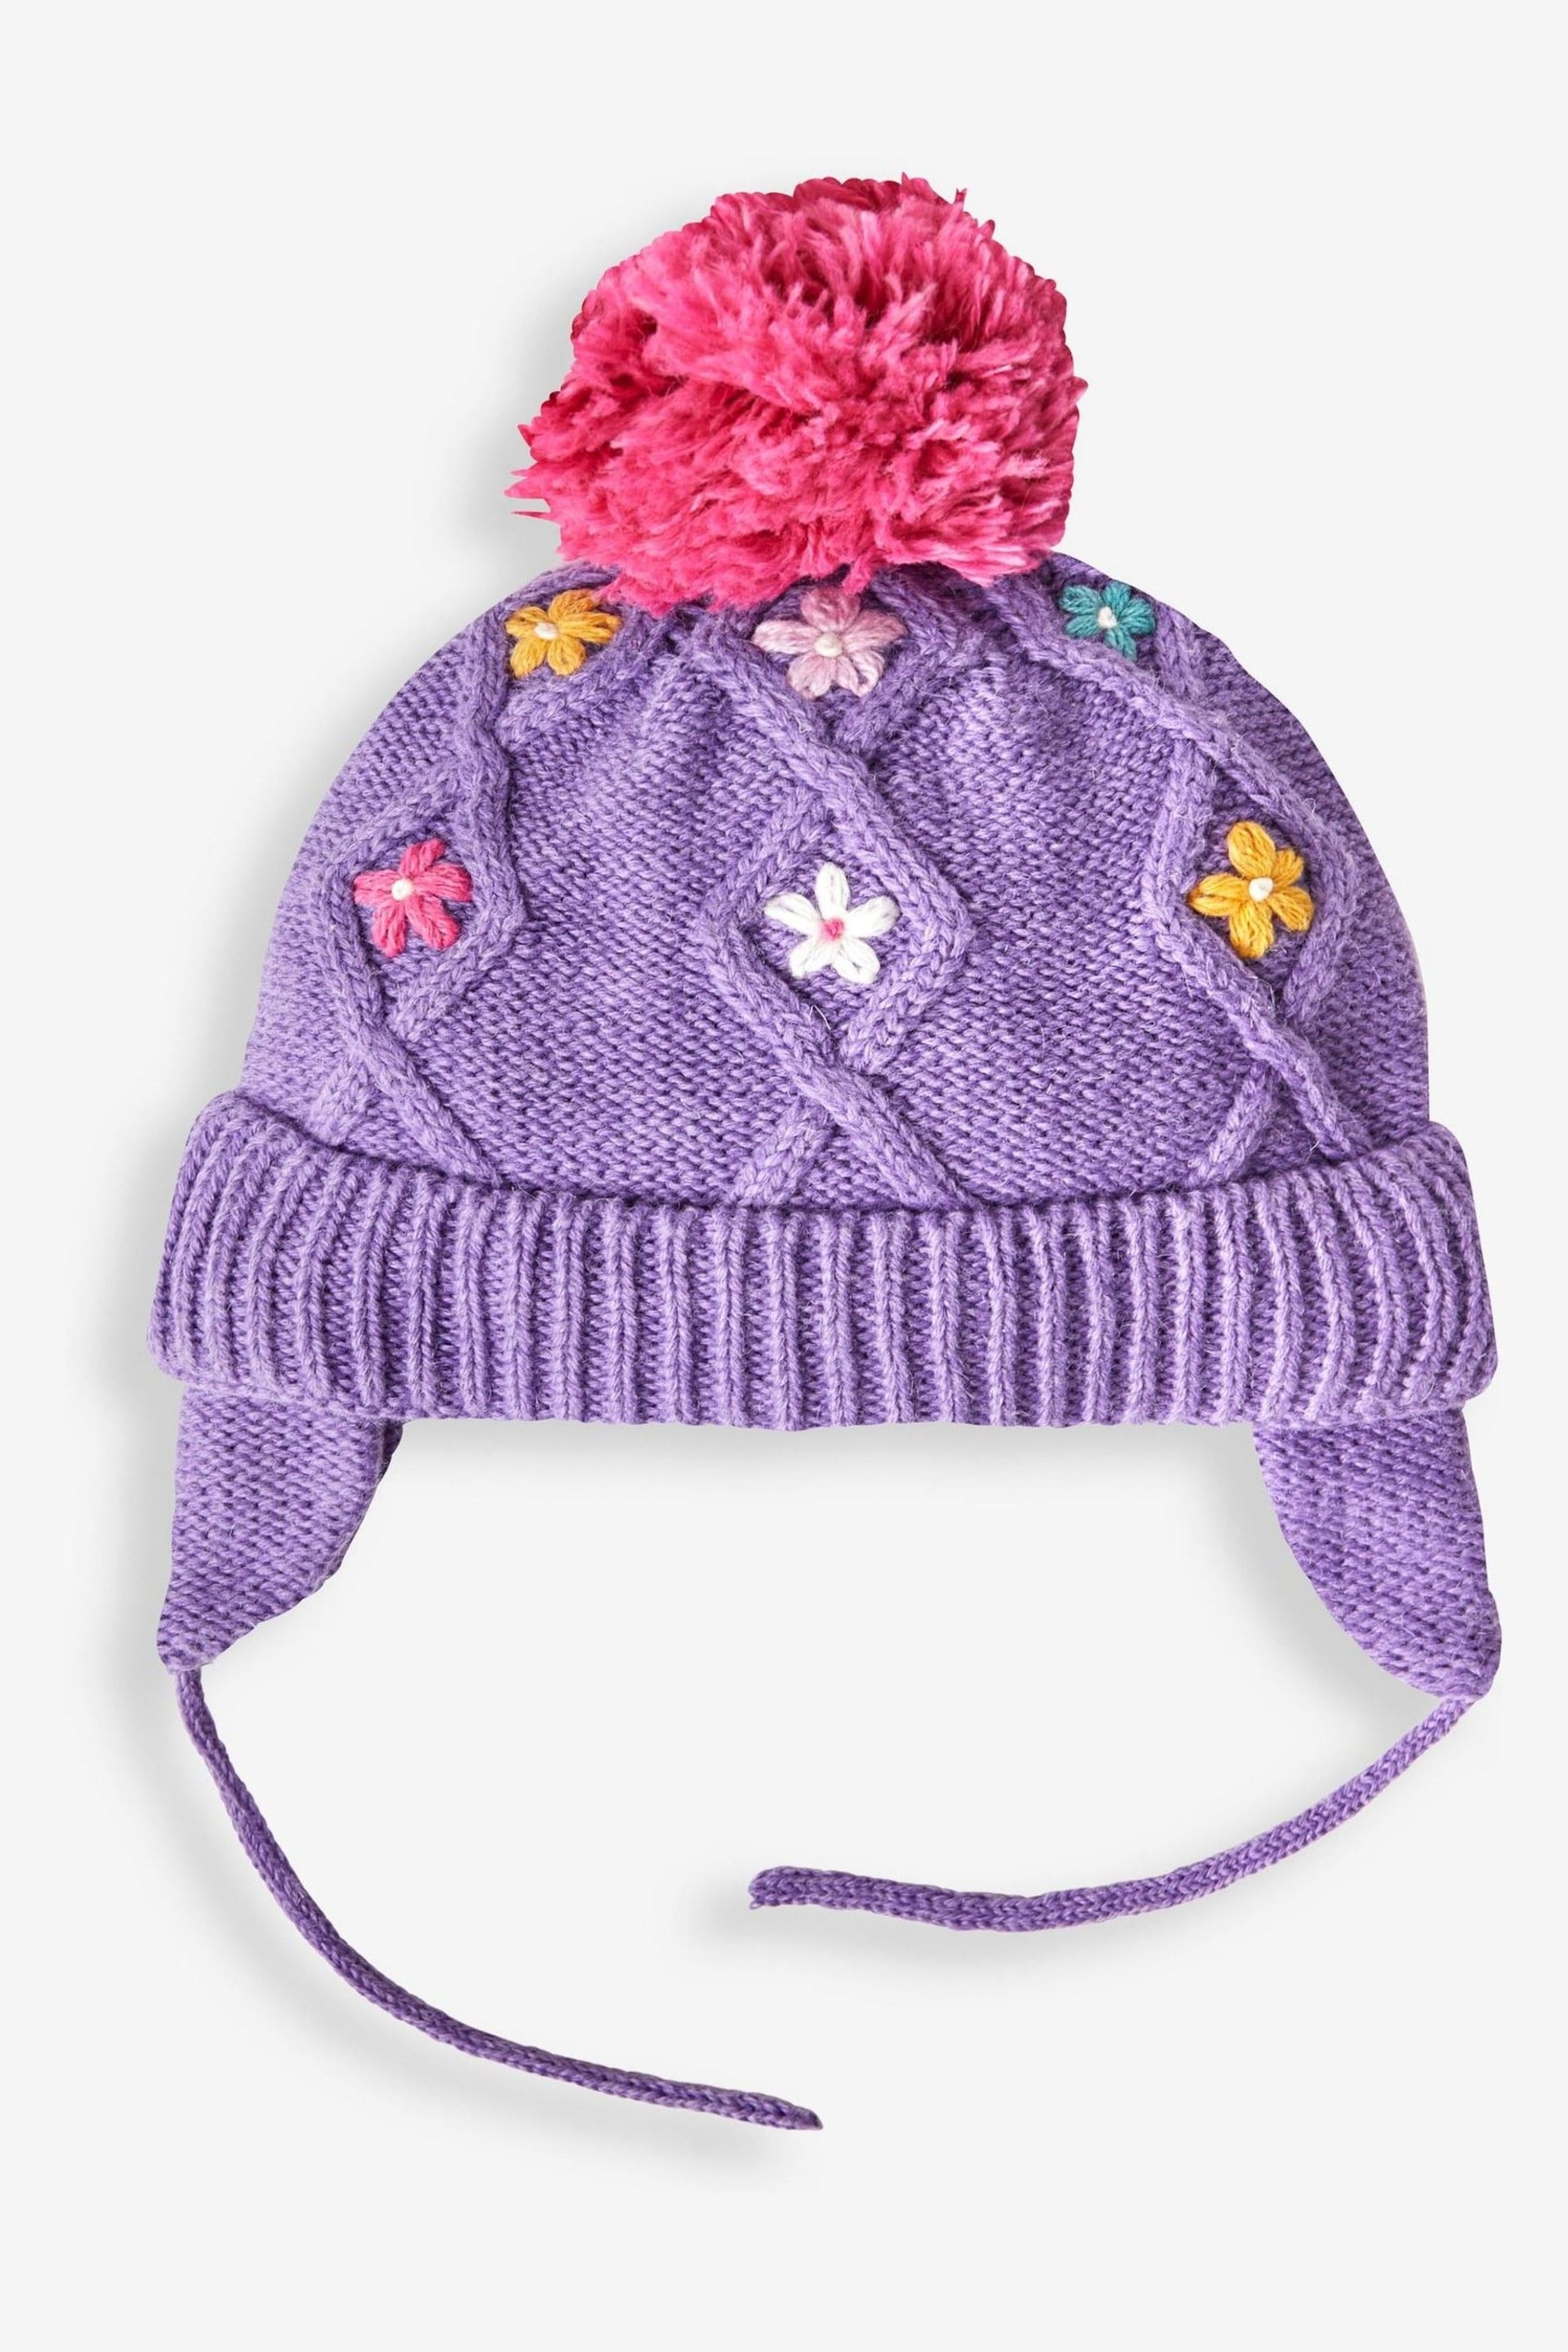 JoJo Maman Bébé Lilac Girls' Floral Embroidered Cable Hat - Image 1 of 2